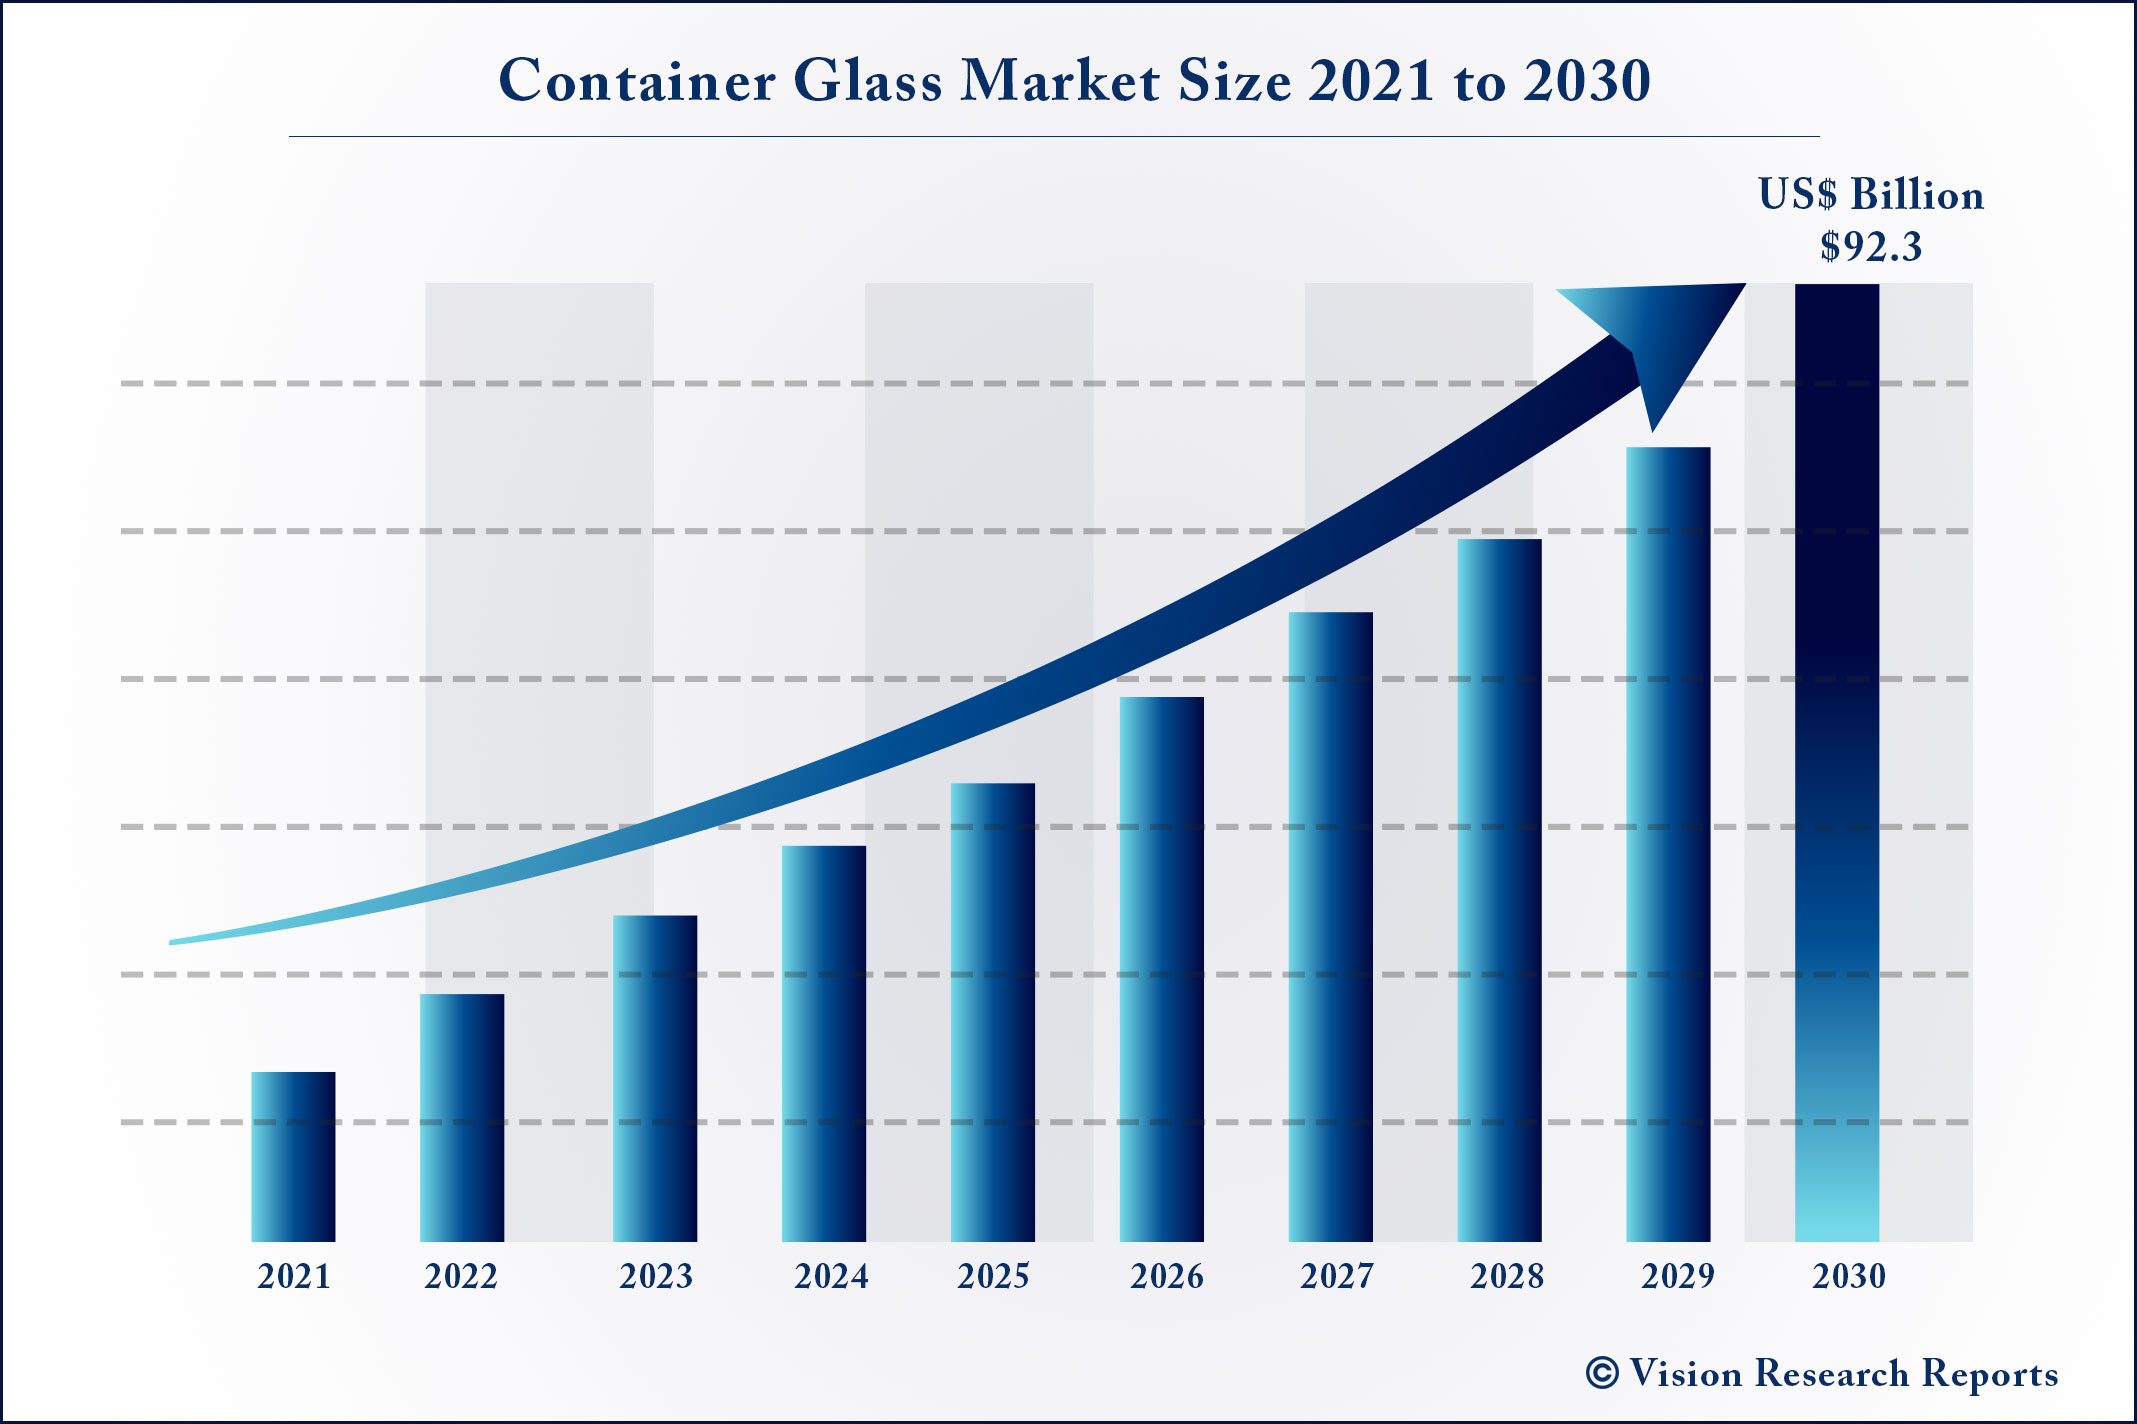 Container Glass Market Size 2021 to 2030